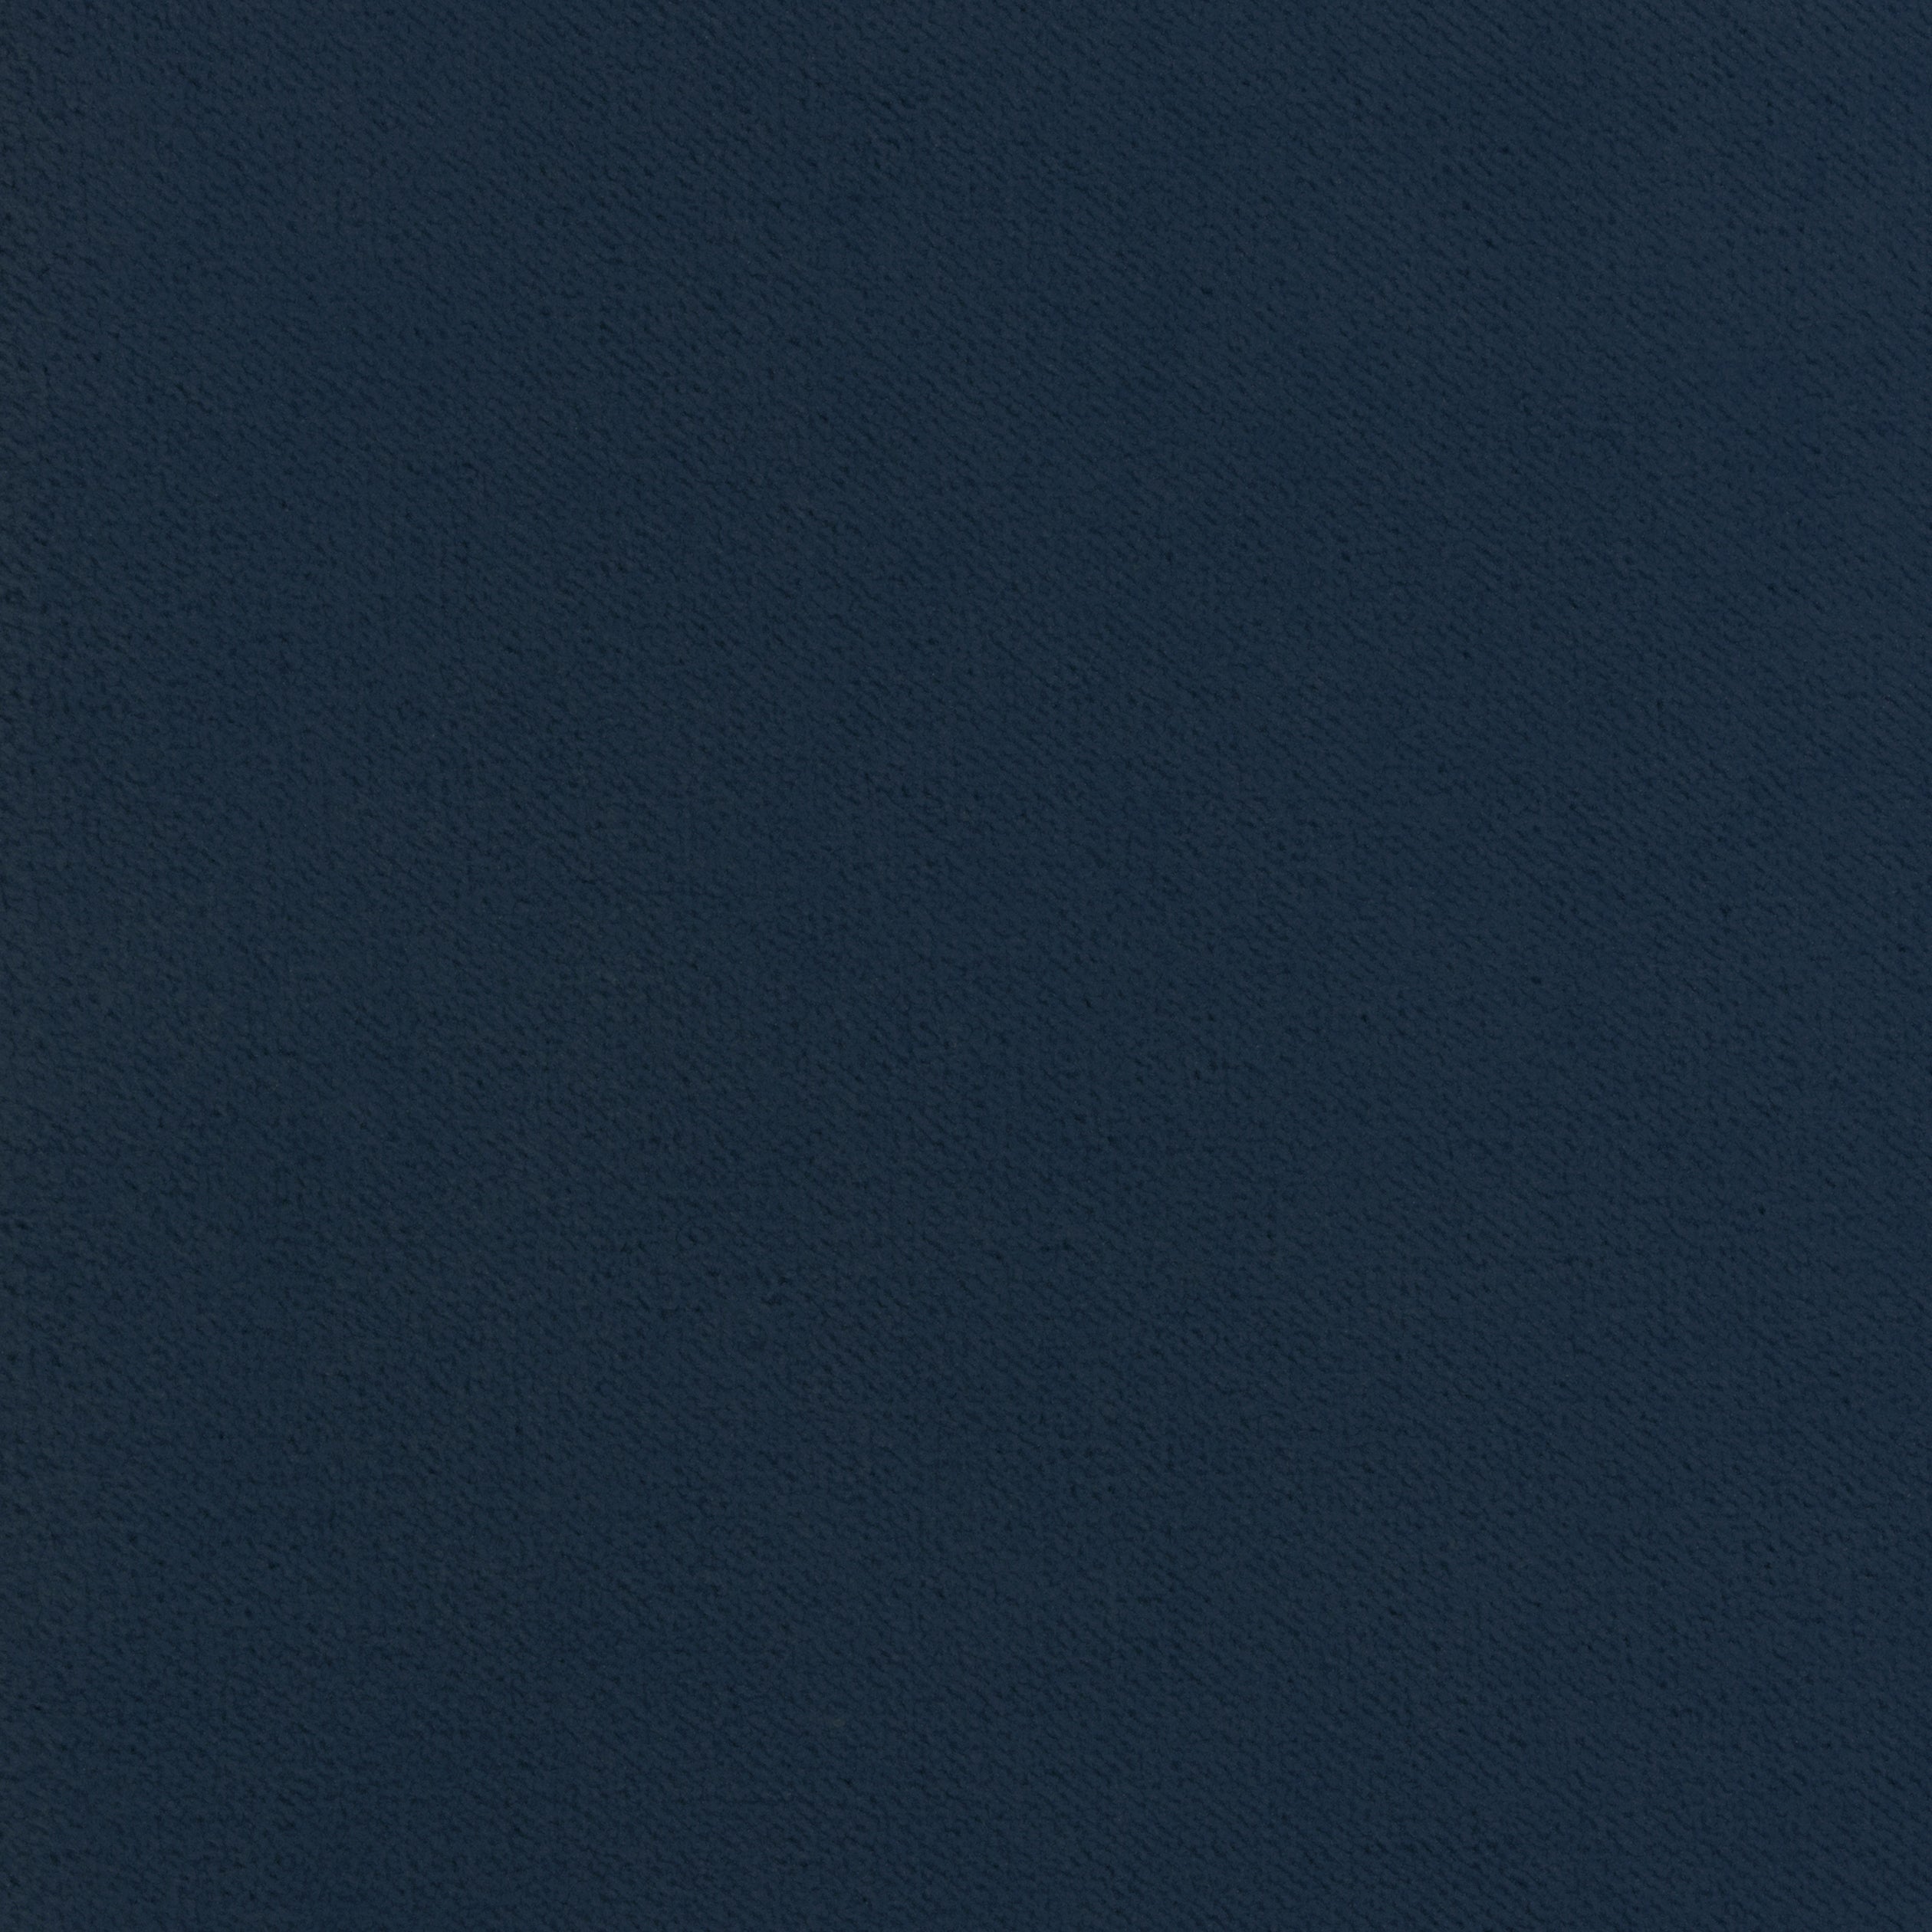 Club Velvet fabric in indigo color - pattern number W7236 - by Thibaut in the Club Velvet collection